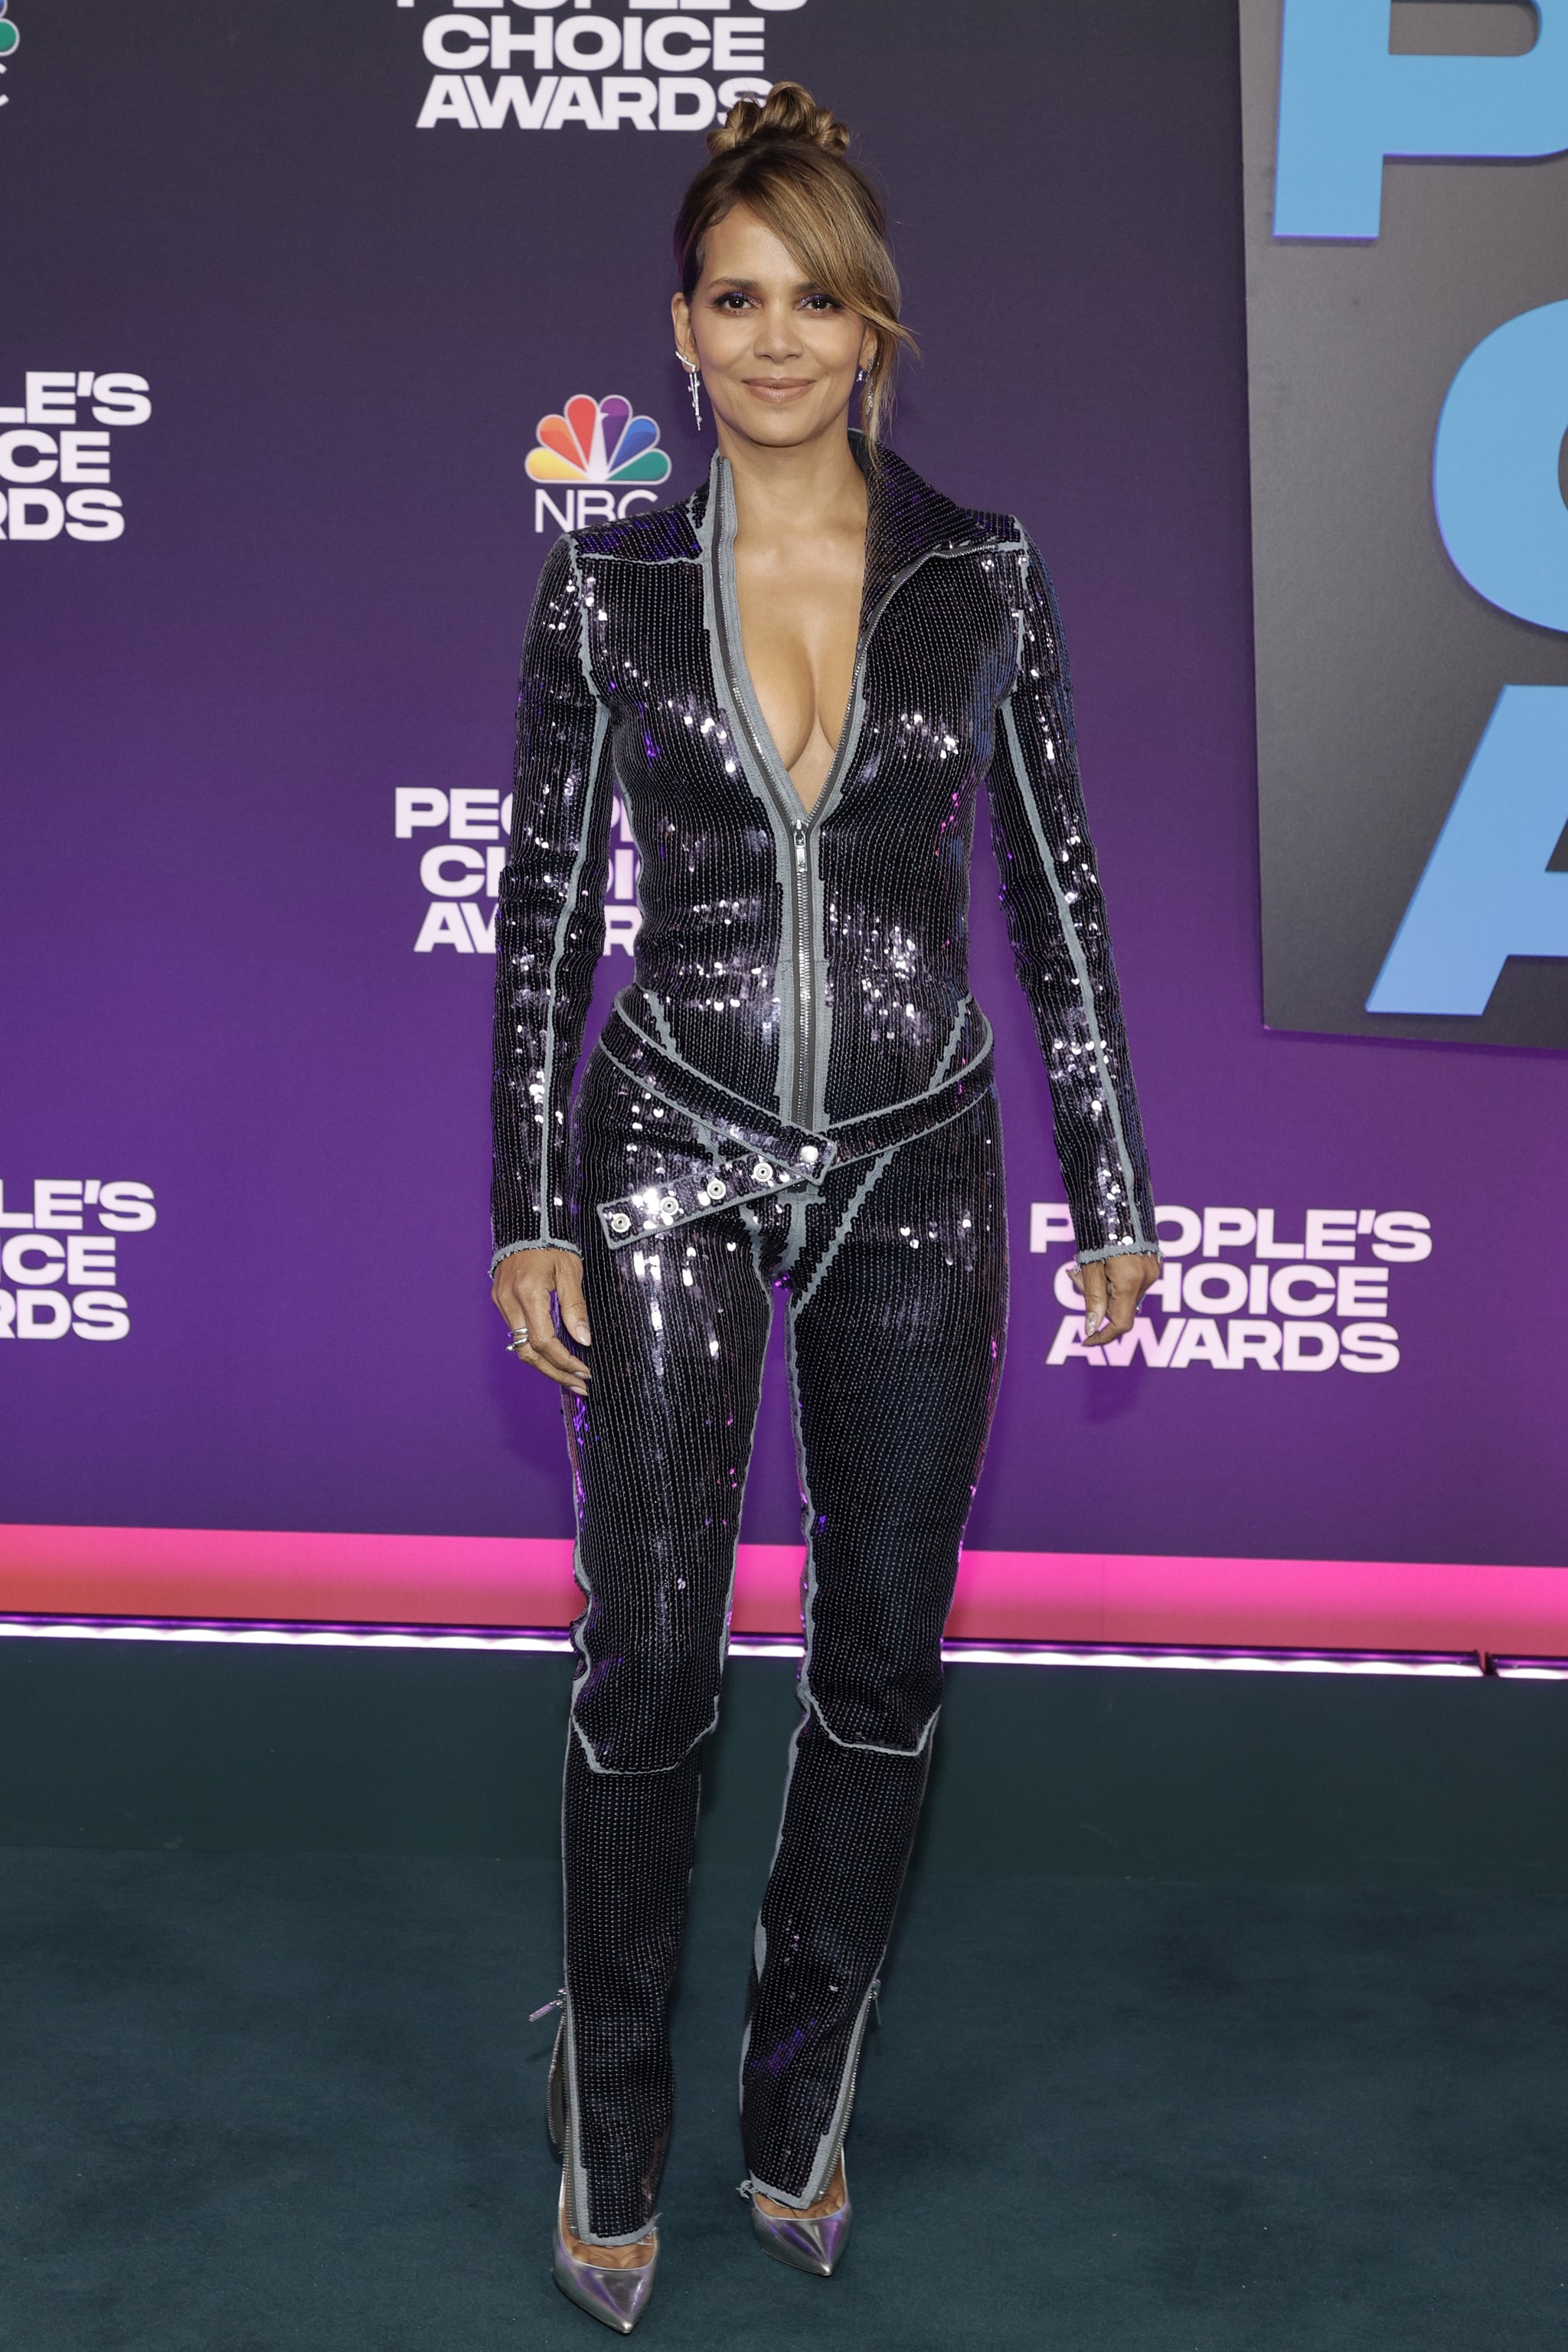 SANTA MONICA, CALIFORNIA - DECEMBER 07: Halle Berry attends the 47th Annual People's Choice Awards at Barker Hangar on December 07, 2021 in Santa Monica, California. (Photo by Amy Sussman/Getty Images,)